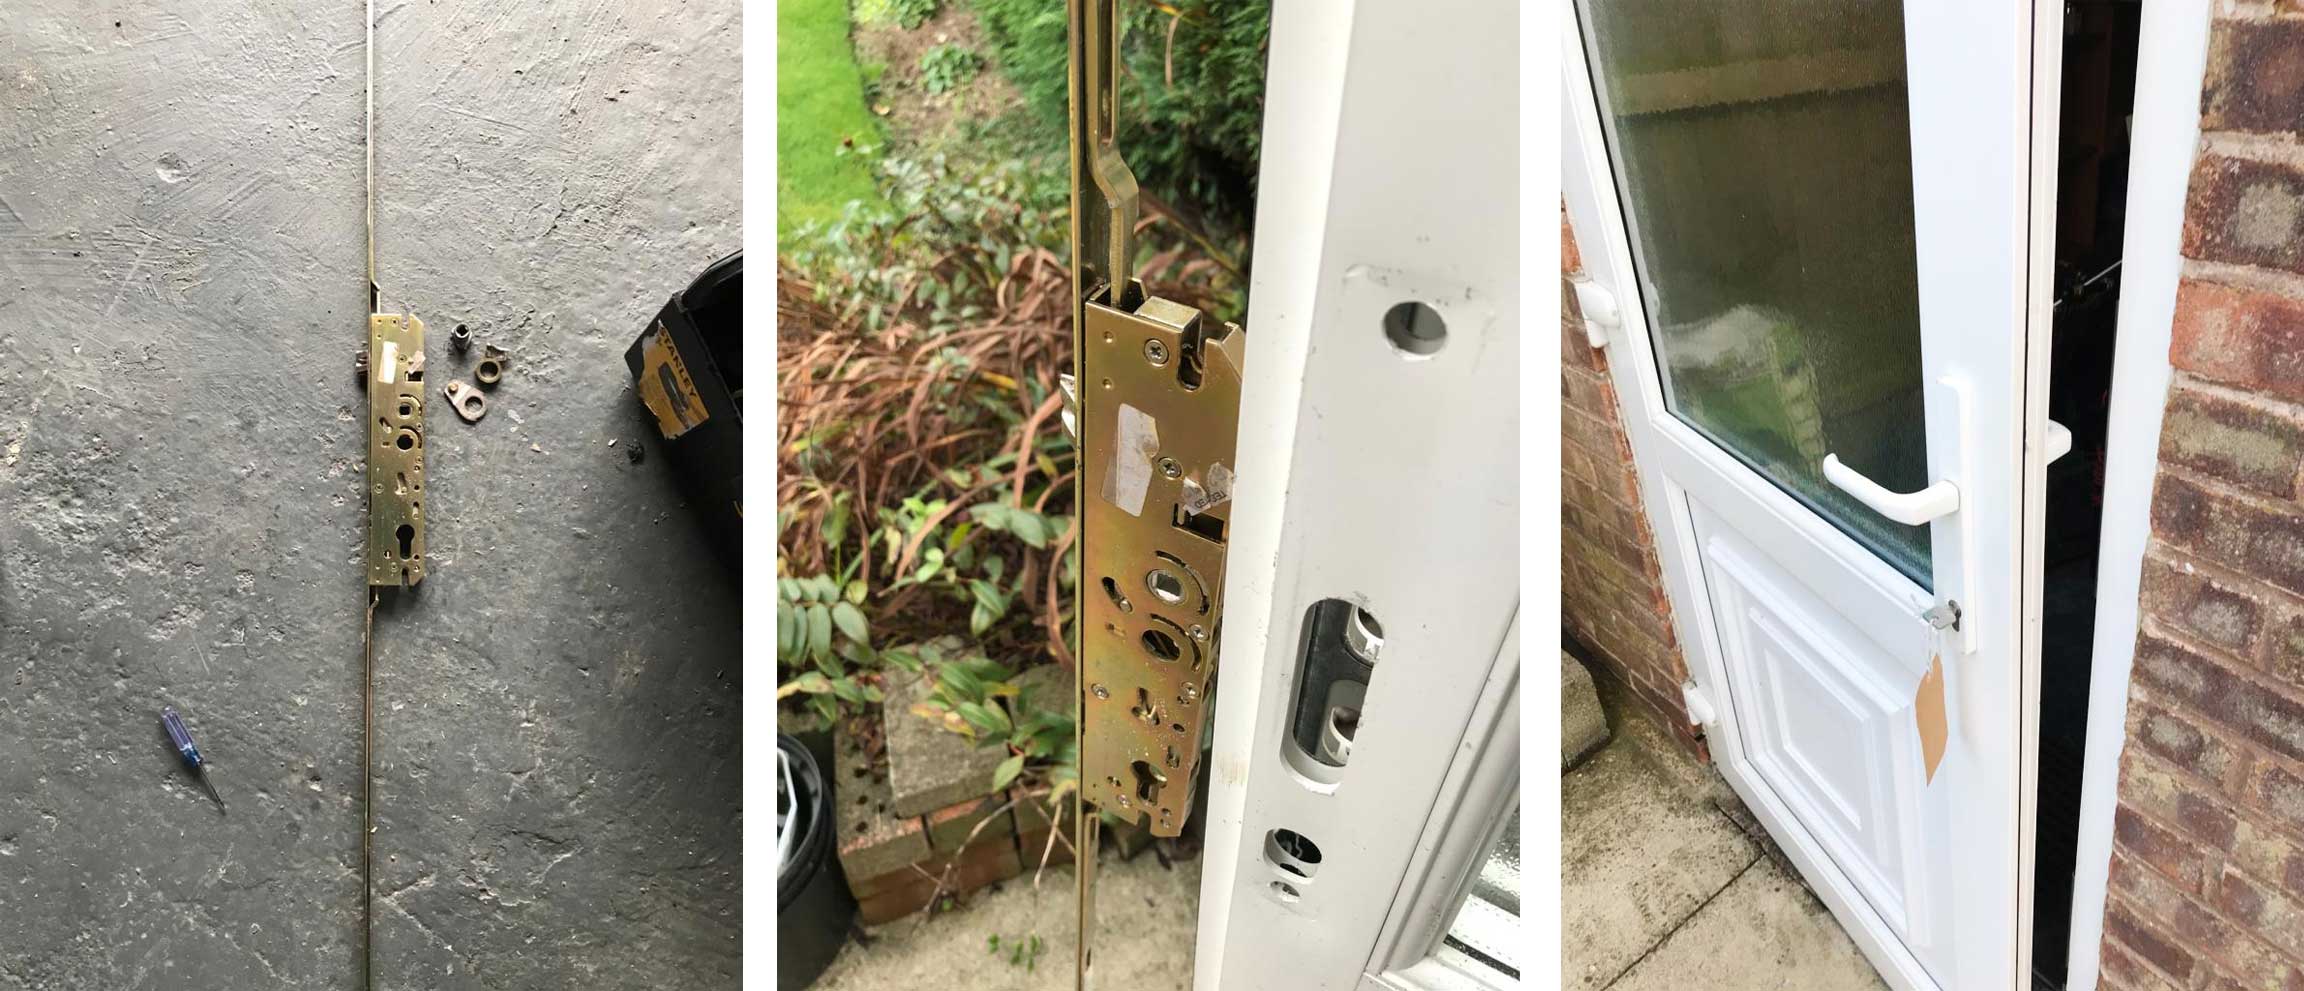 afford a lock york blog january 2020 photos of repaired a UPVC door mechanism rather than renewing it